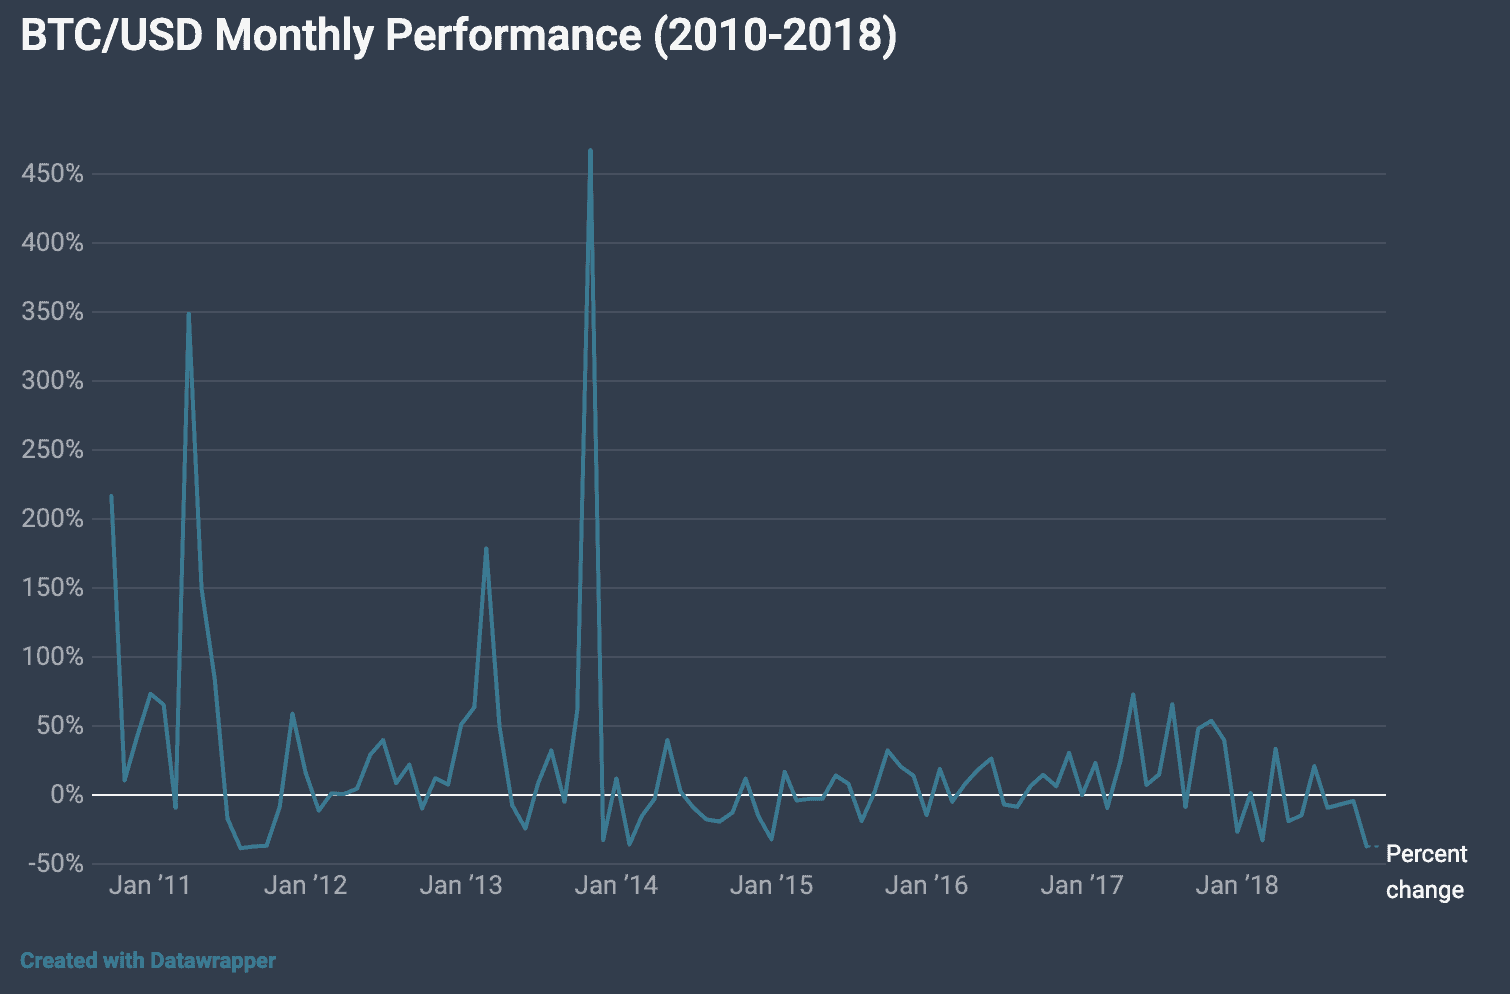 BTC/USD monthly performance, CoinDesk